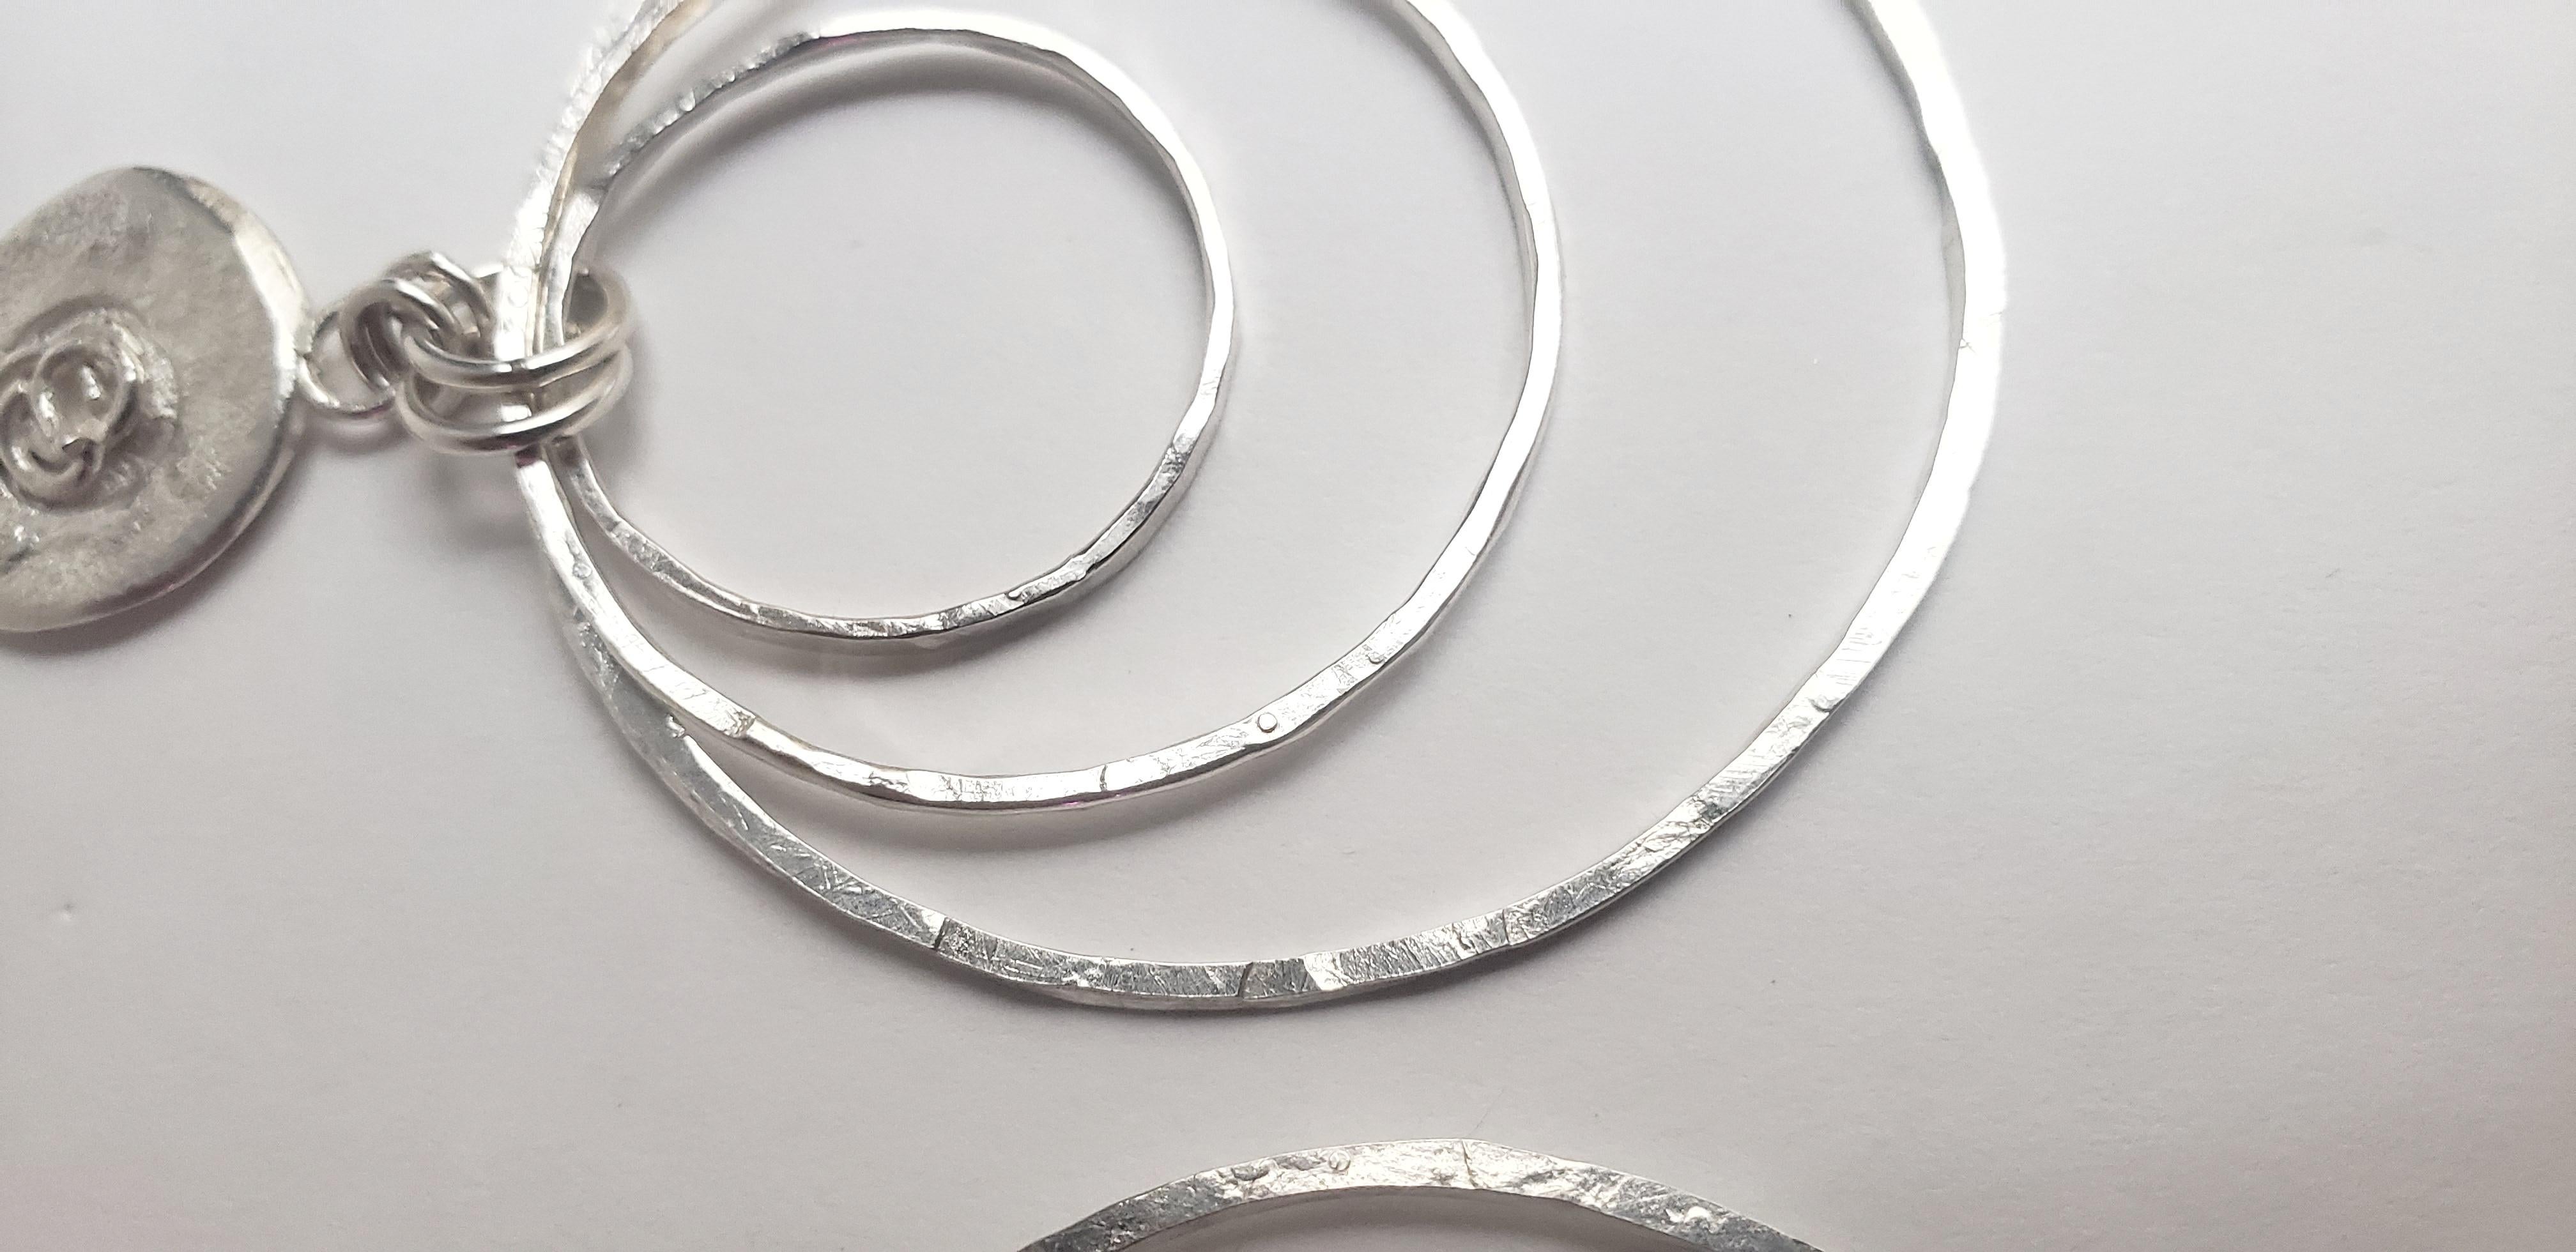 These handcrafted earrings are a beautiful combination of three-layered hand-hammered hoops accompanying organic volcanic textured silver MEDALLIONS.
One of the core elements of my art and jewels is MEDALLION. Each MEDALLION is created through a